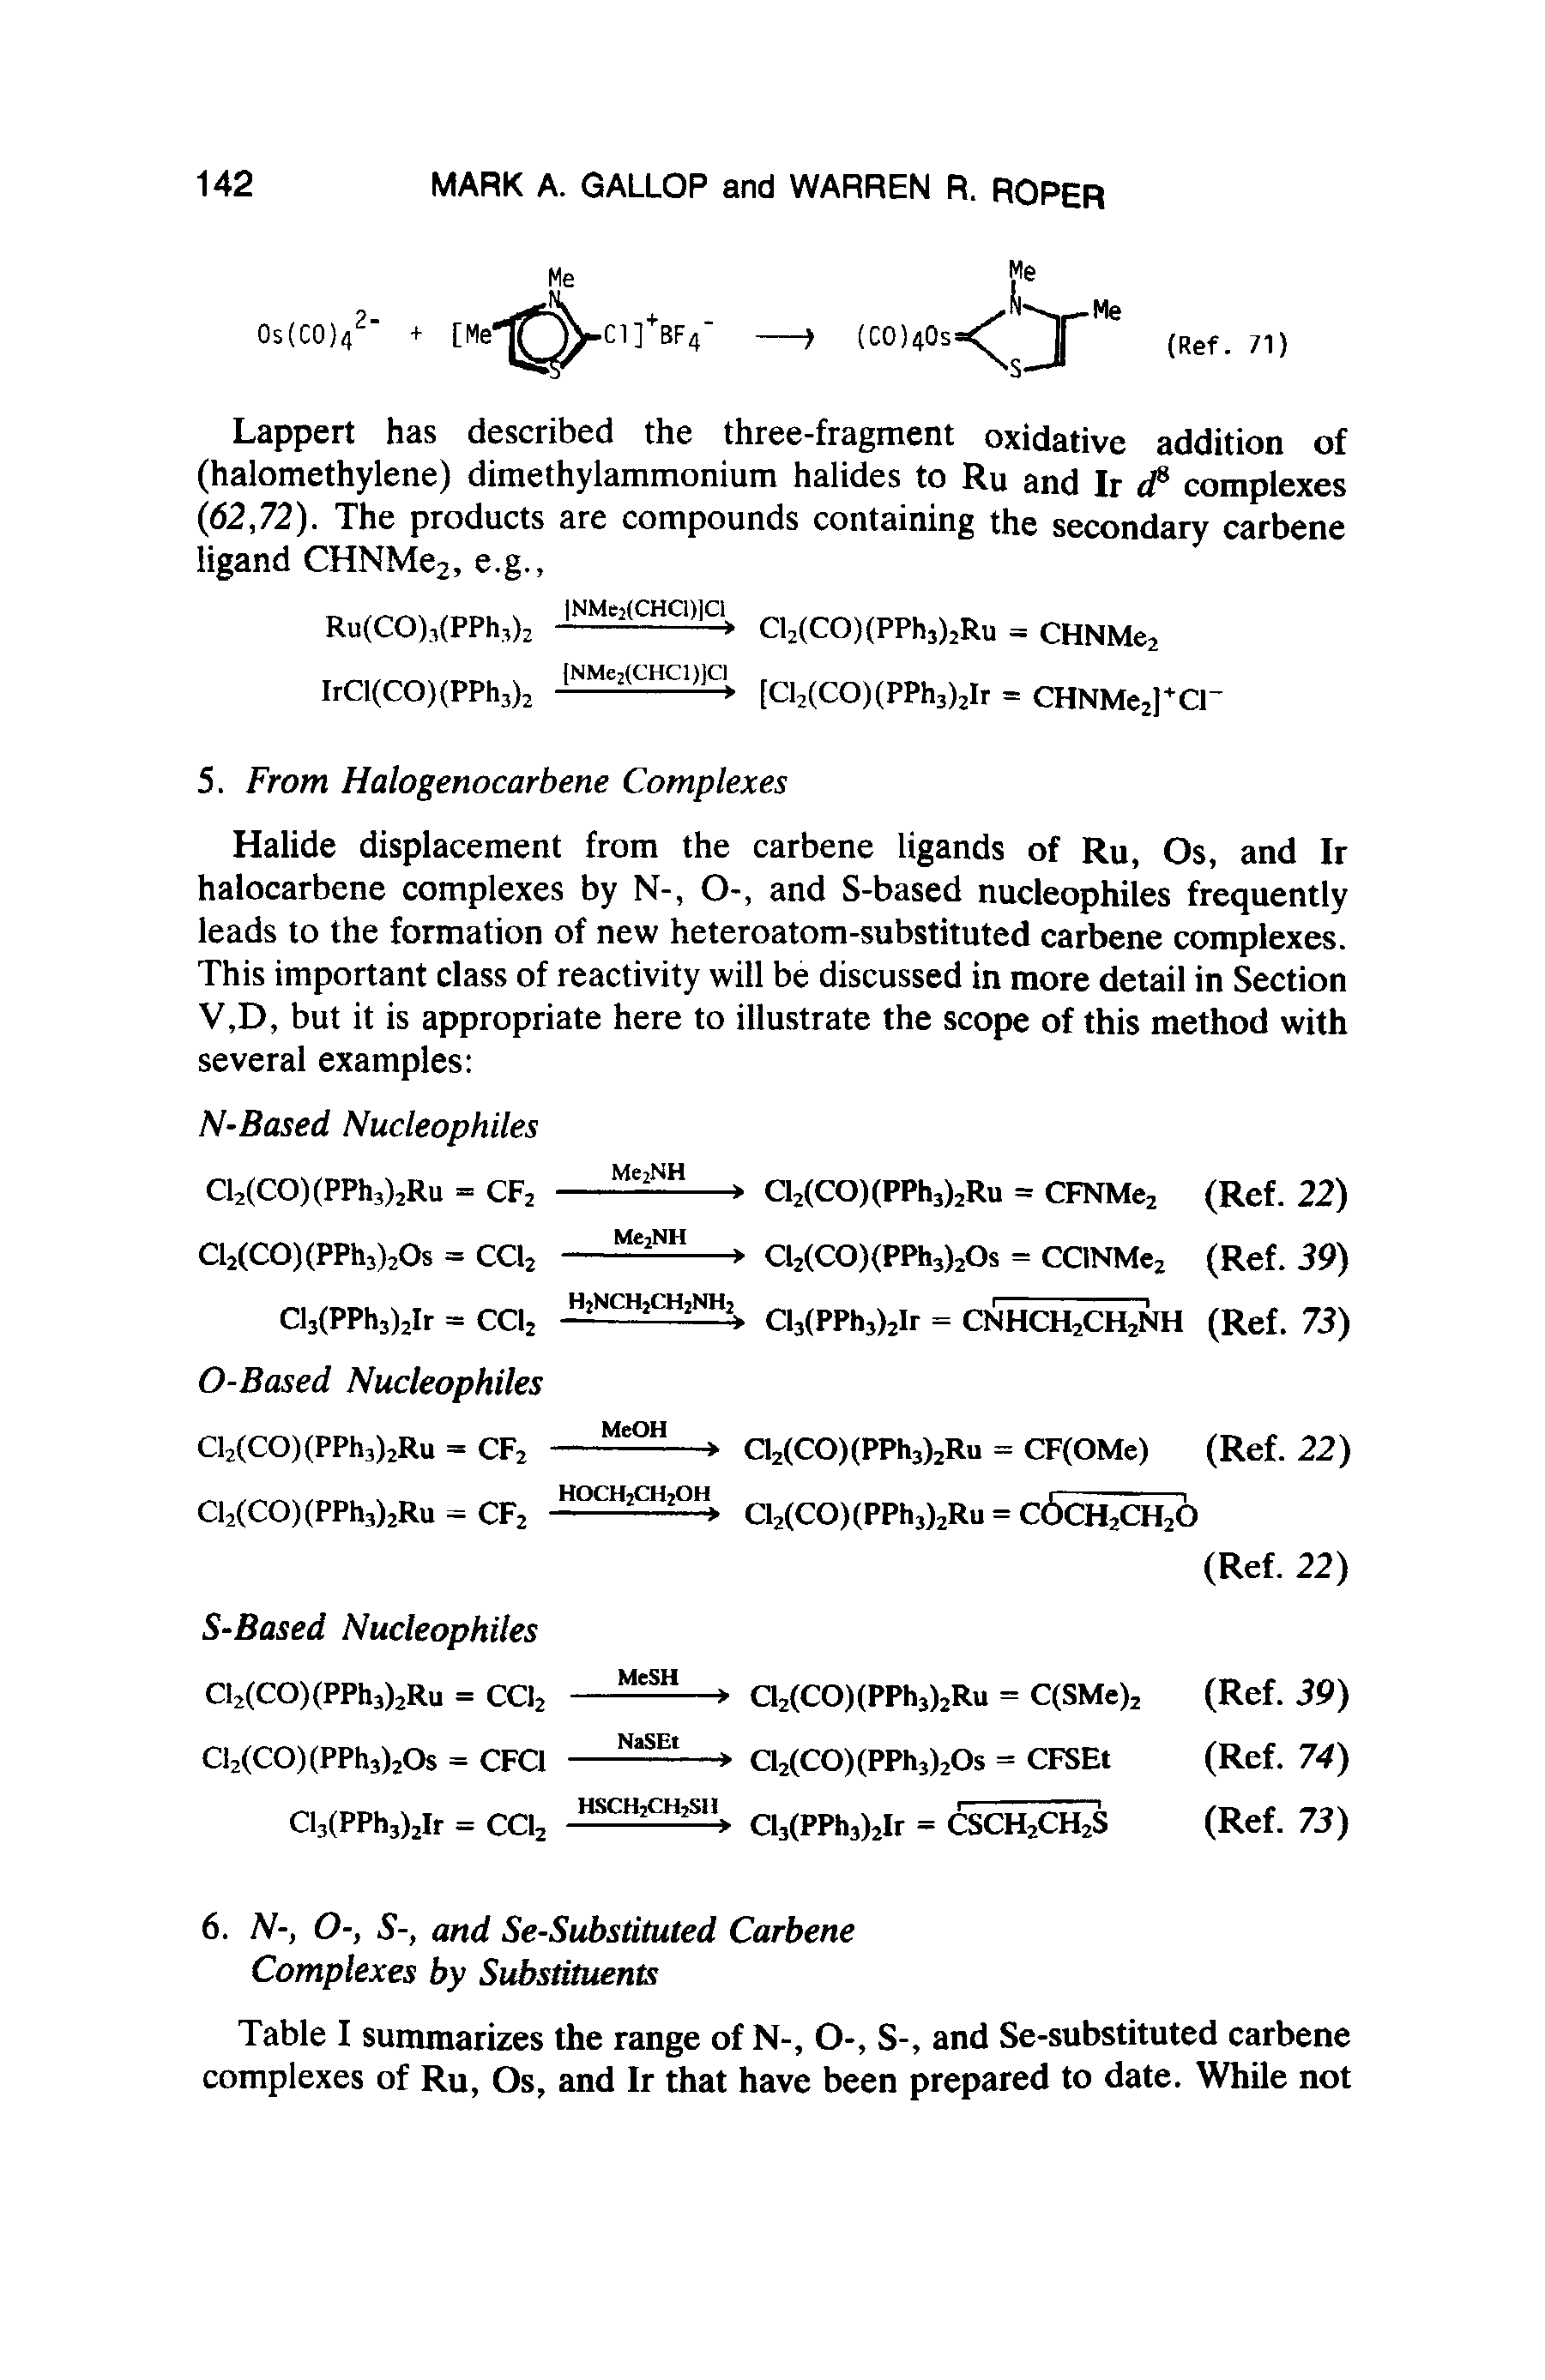 Table I summarizes the range of N-, O-, S-, and Se-substituted carbene complexes of Ru, Os, and Ir that have been prepared to date. While not...